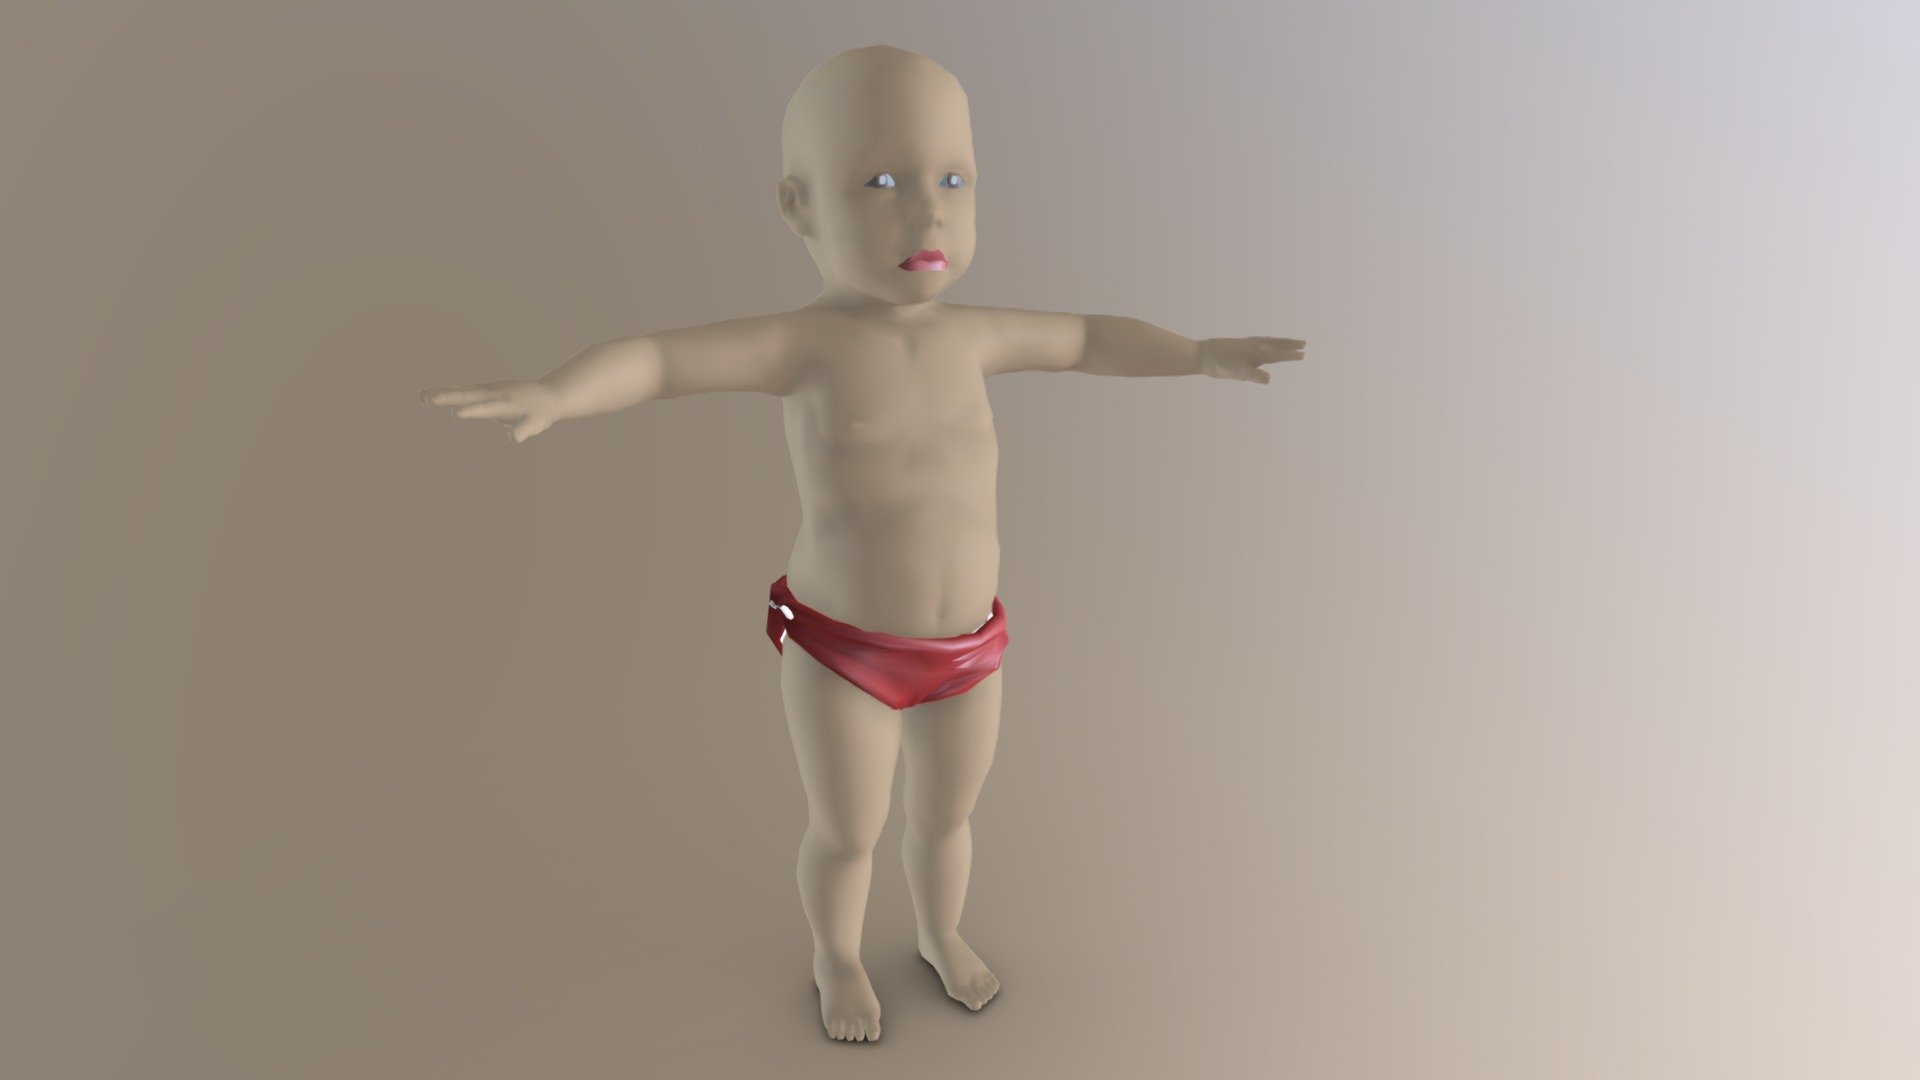 Little Baby Boy

Downlod Low Mesh for Fast Redndering 
Quality Output Render in Less time - Little Baby Boy - 3D model by Kailash H Kanojia (@KailashHKanojia) 3d model